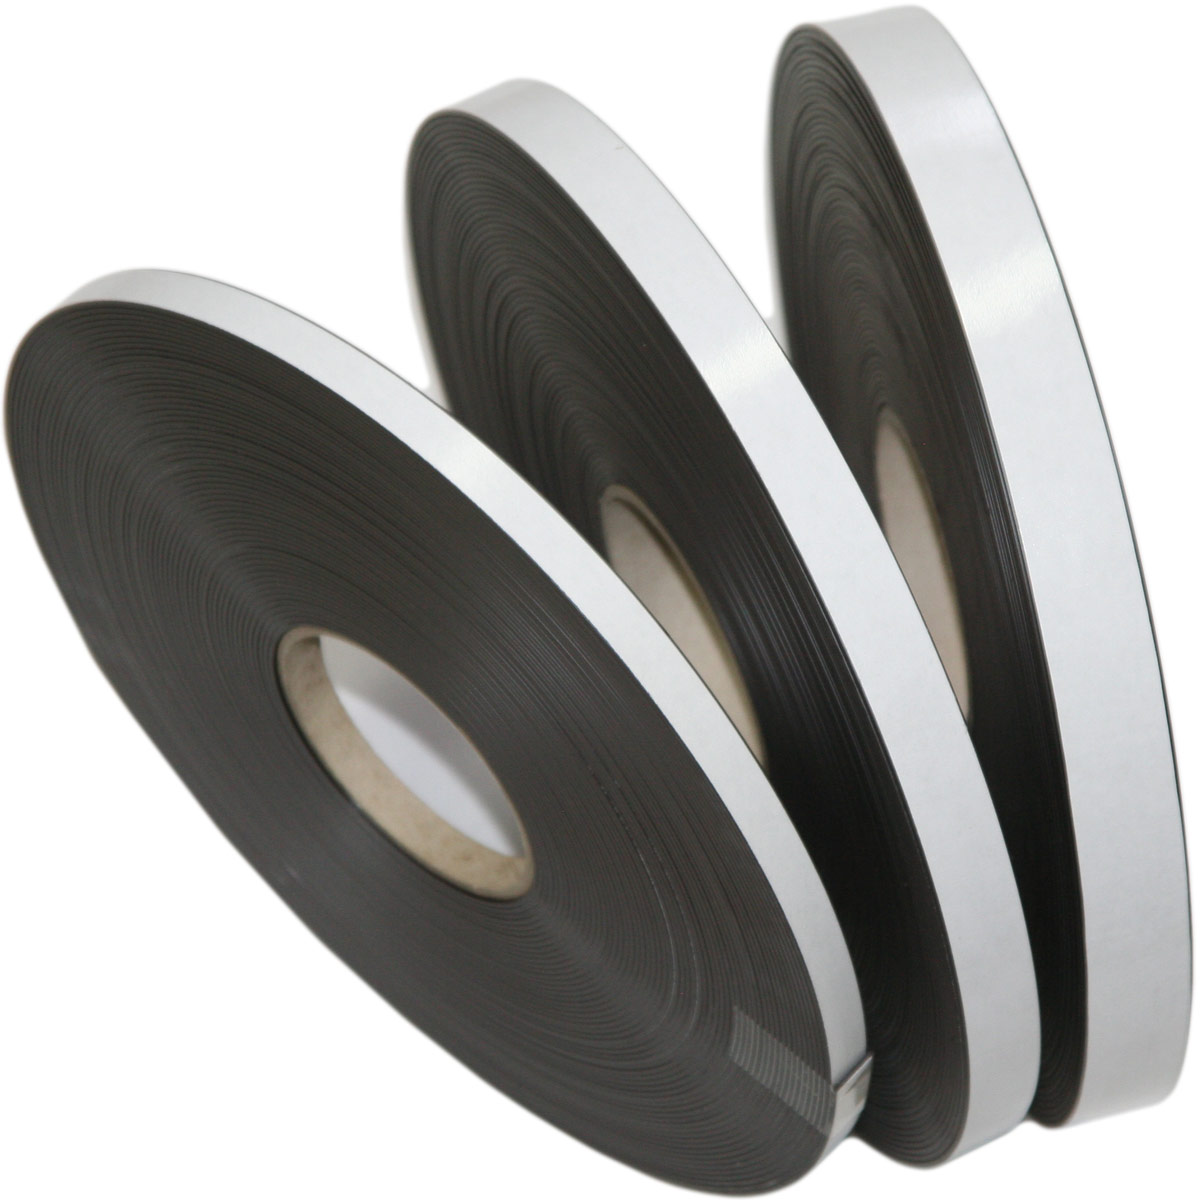 Self-adhesive magnetic tape with Standard glue Dimension: 12,7 mm x 30 m  Thickness: 1.5 mm Quantity in package: 1